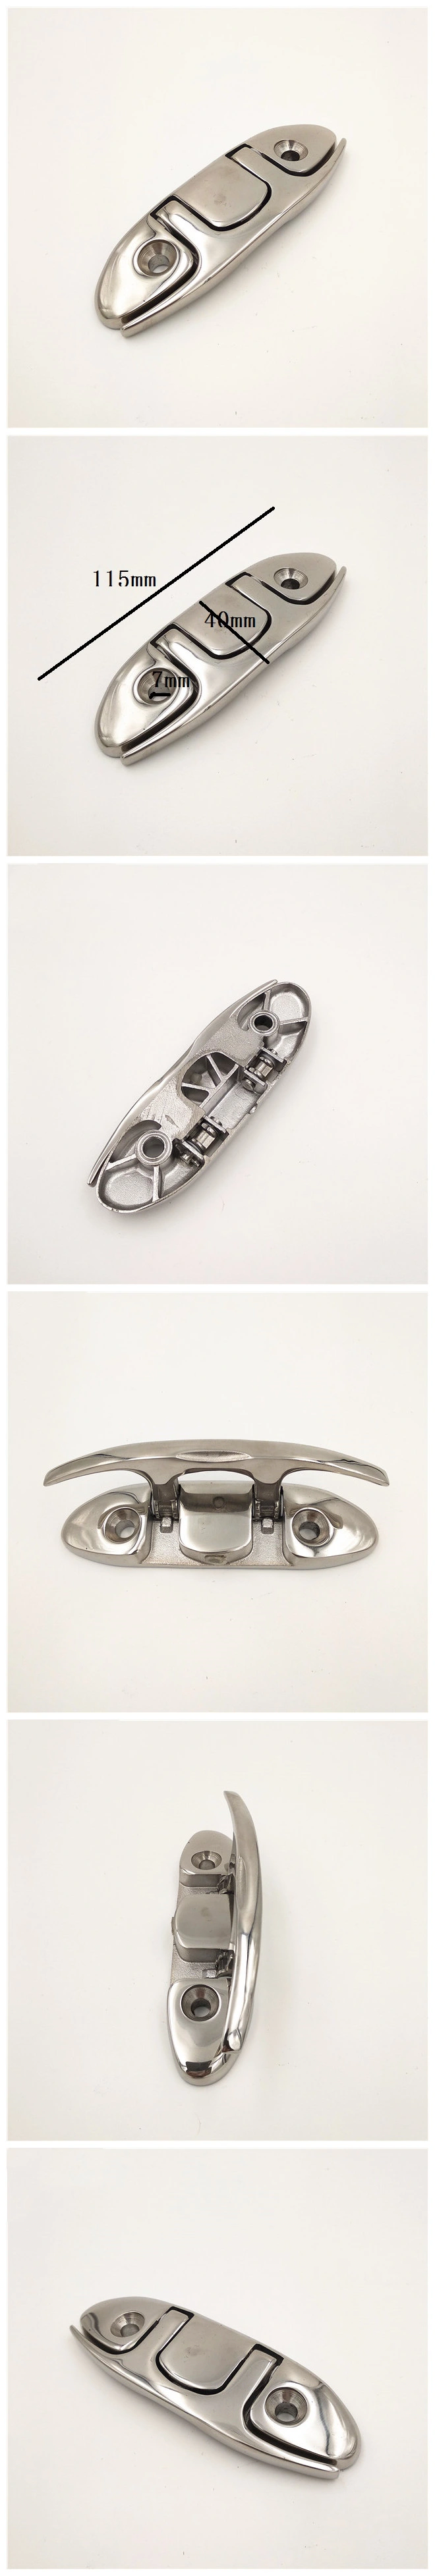 316 Stainless Steel Folding Boat Marine Cleat for Fishing Boat/Yacht